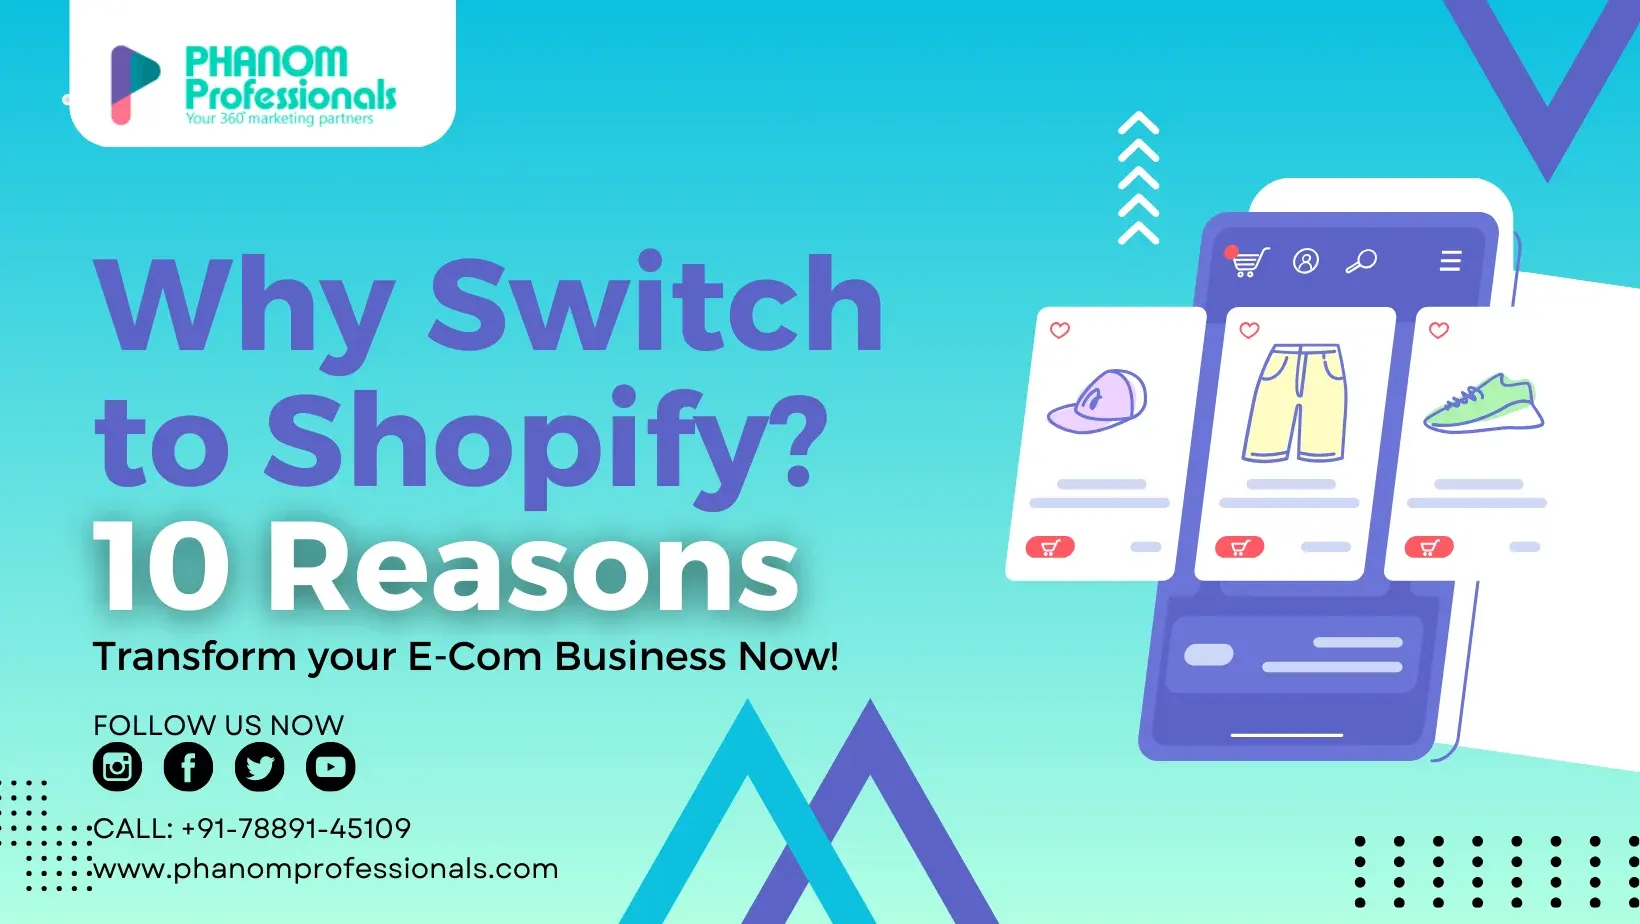 Top 10 Reasons Why Transfor Your Website into an E-commerce Powerhouse with Shopify.